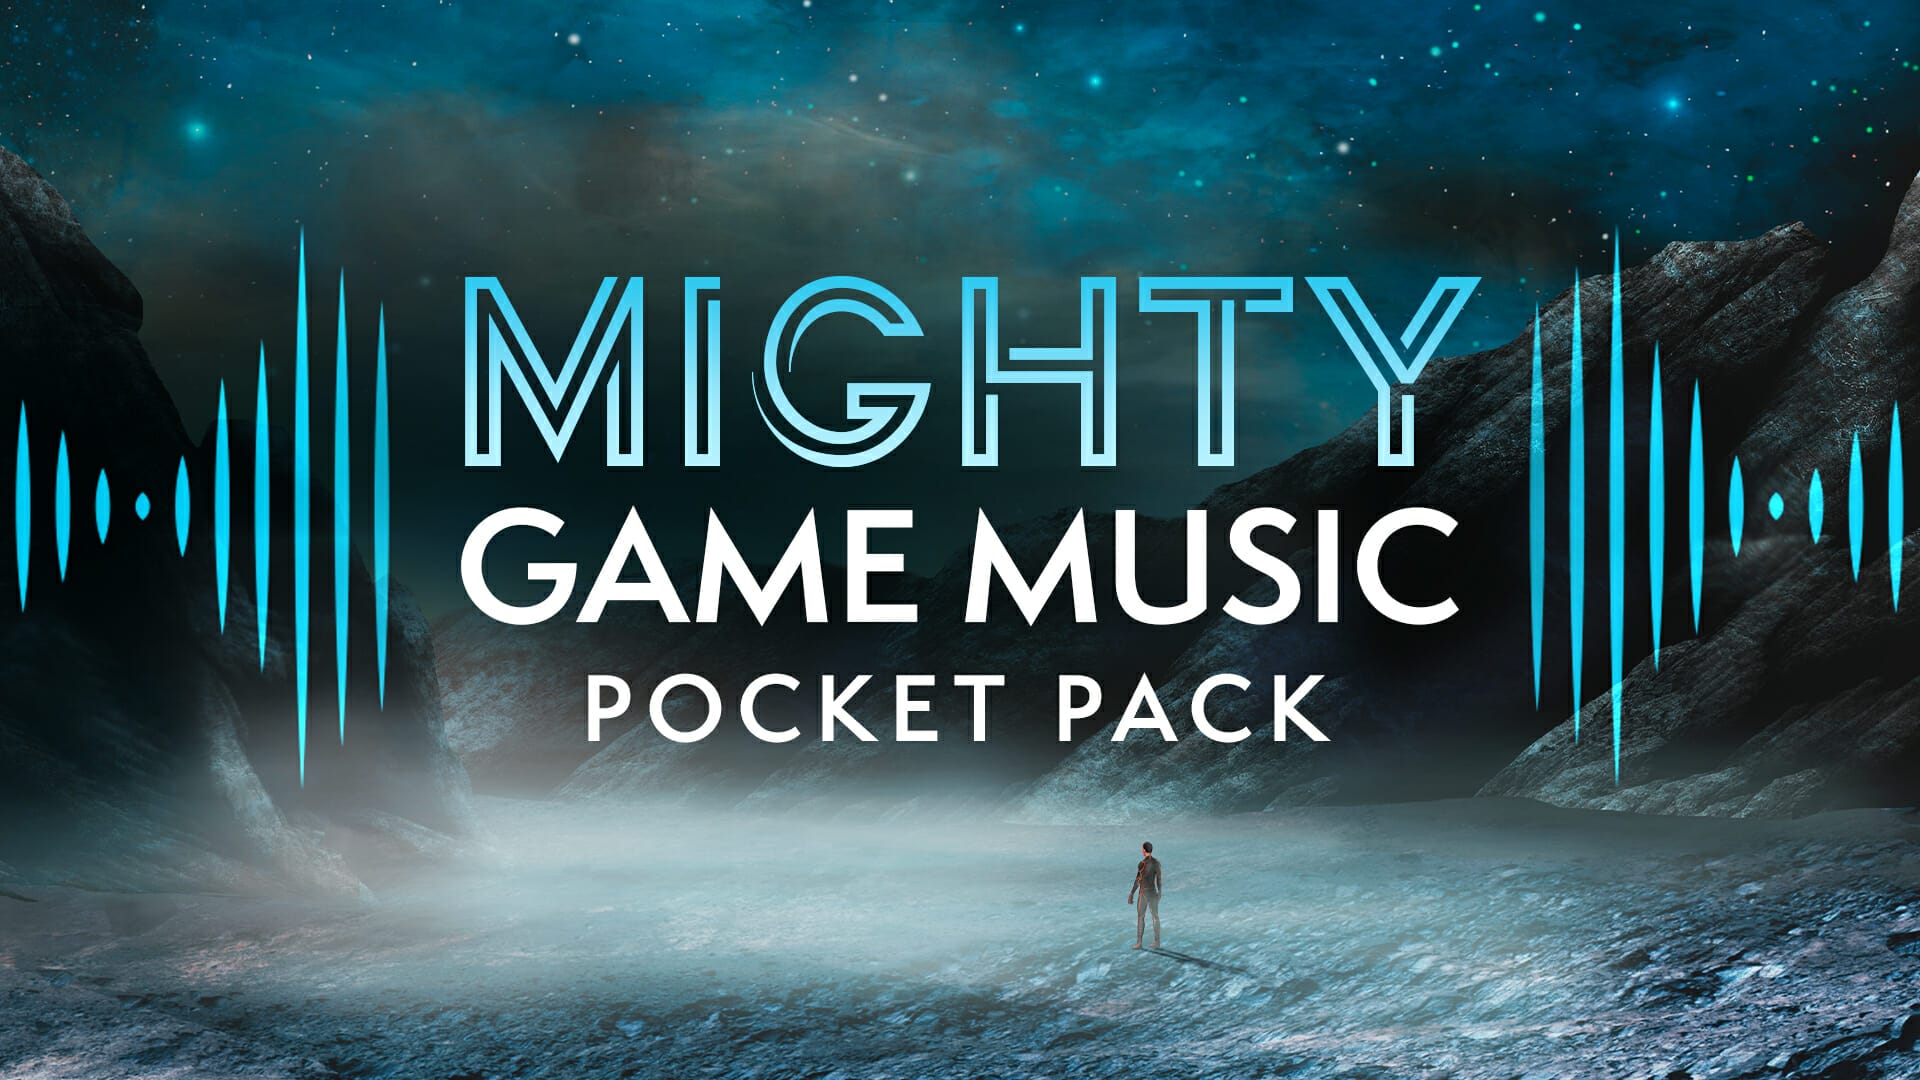 Might Game Music Pocket Pack